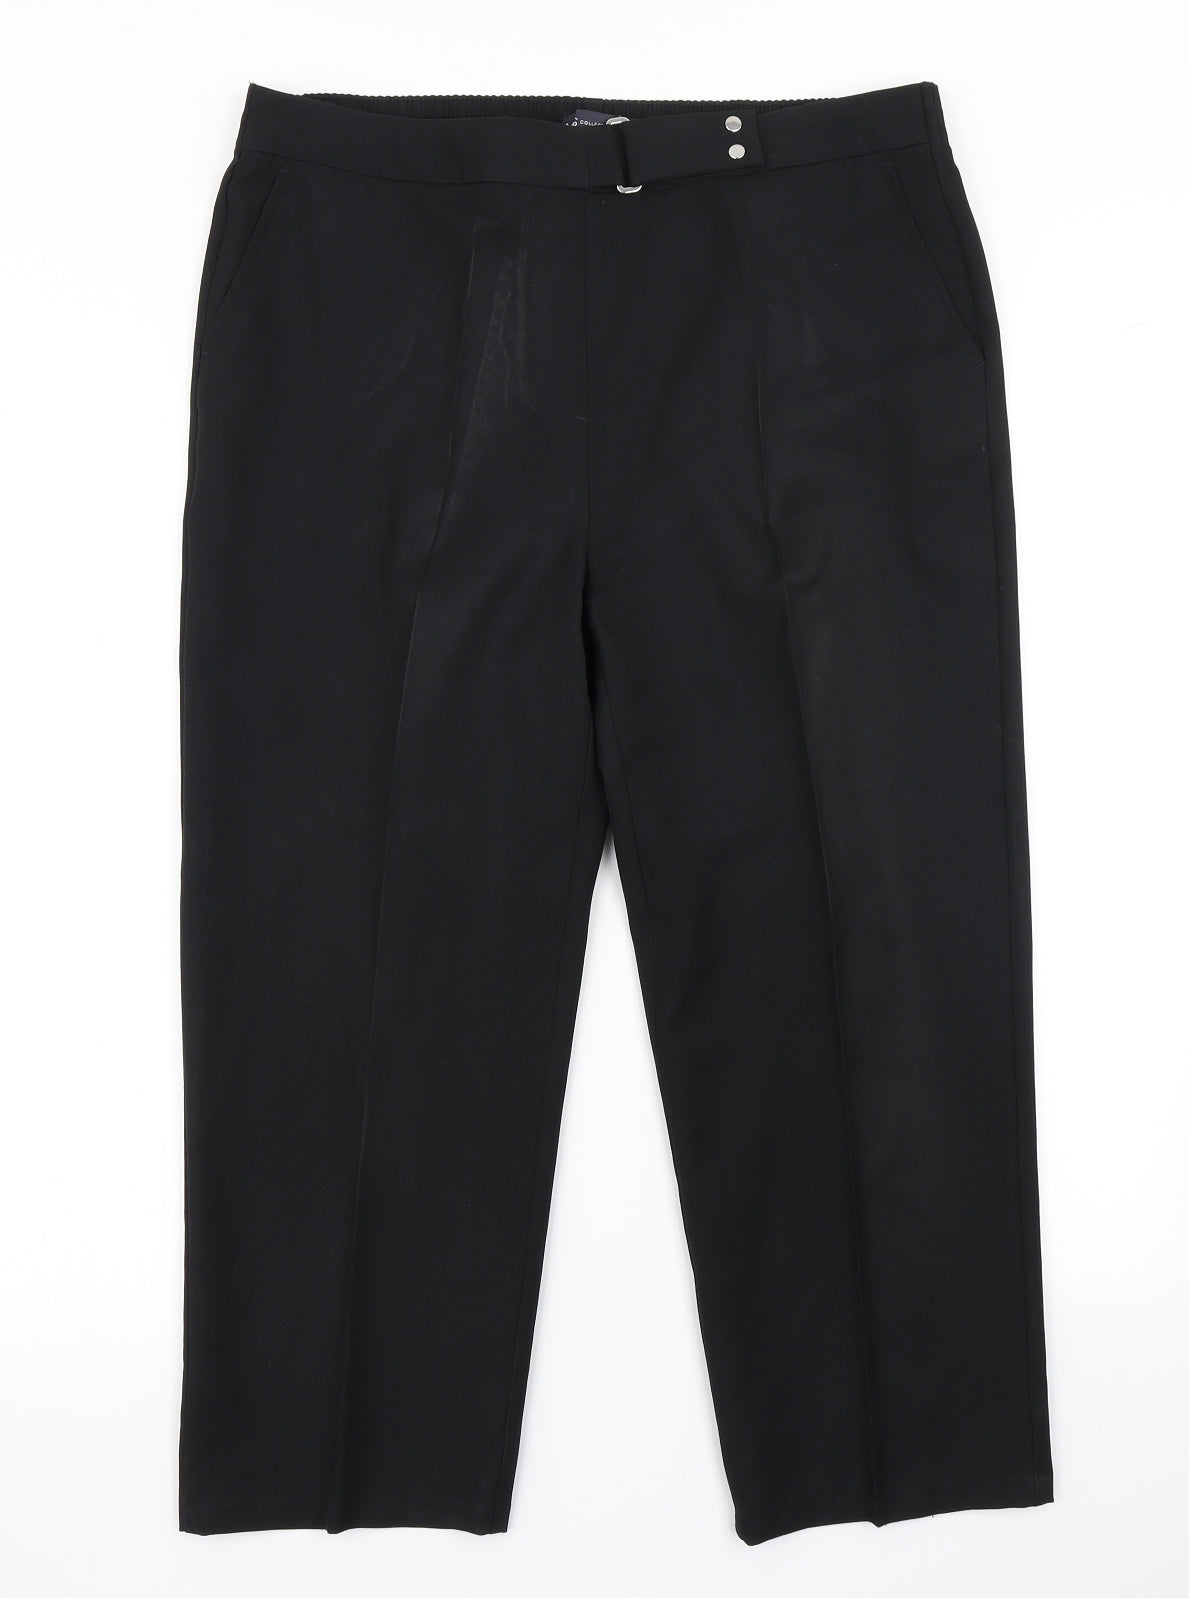 M&S Collection Womens Black Dress Pants Trousers Size 14 L20 in